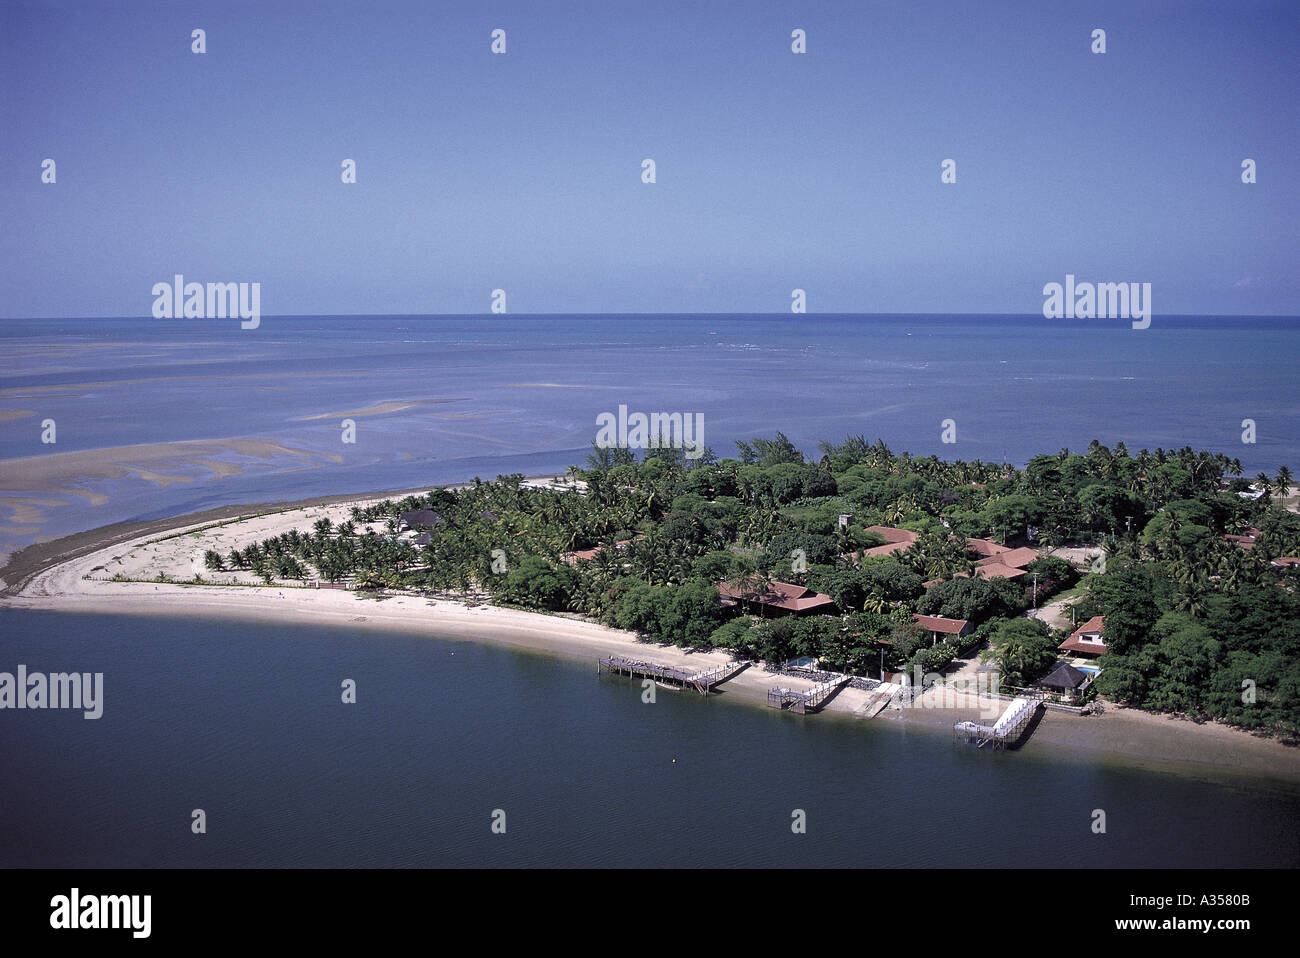 Aerial view of a beach resort Stock Photo